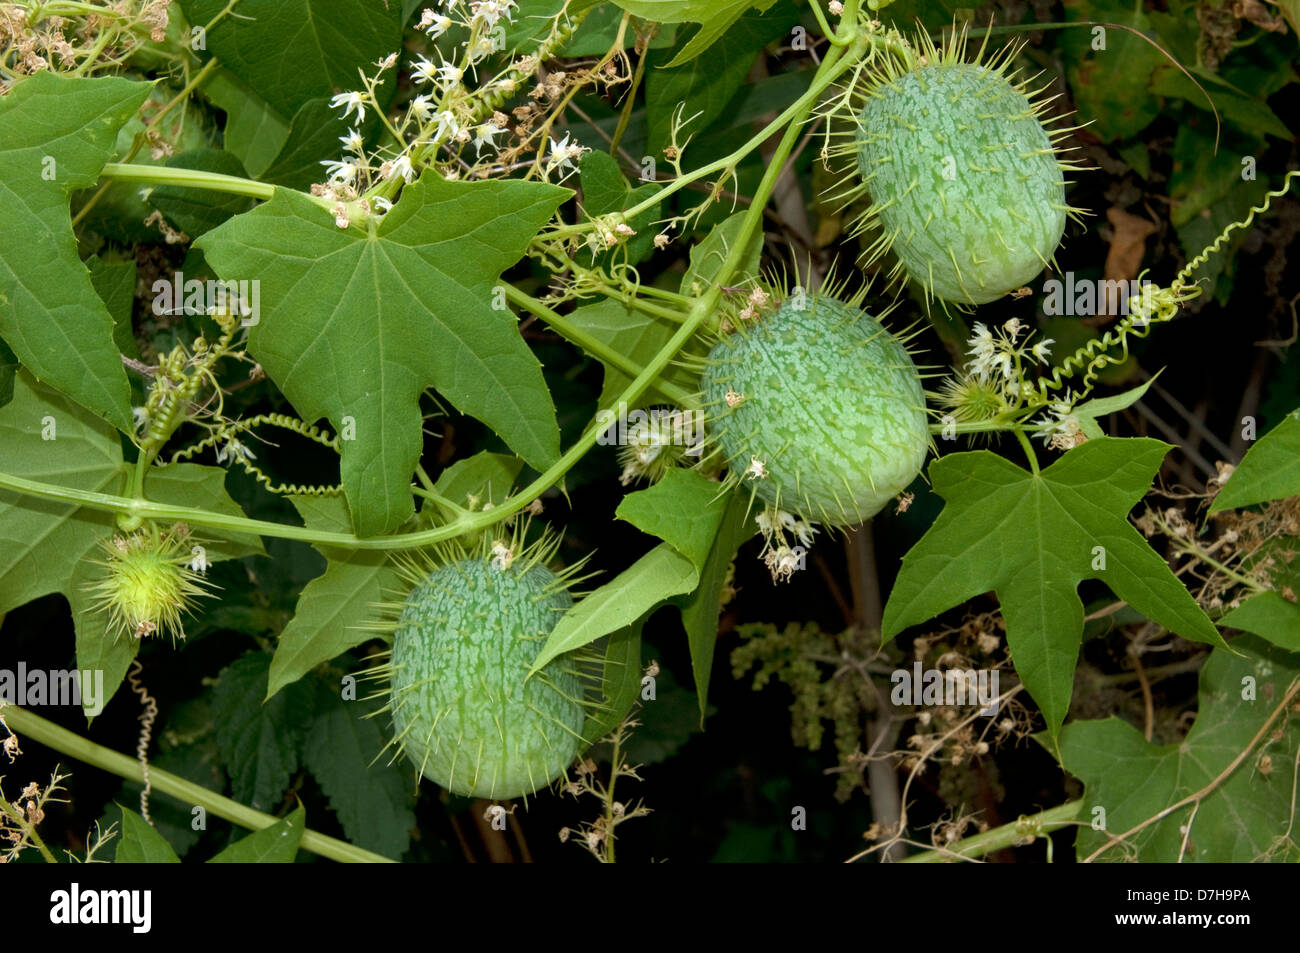 Wild Cucumber, Prickly Cucumber, Balsam Apple (Echinocystis lobata). Tendrils with fruit and flowers Stock Photo